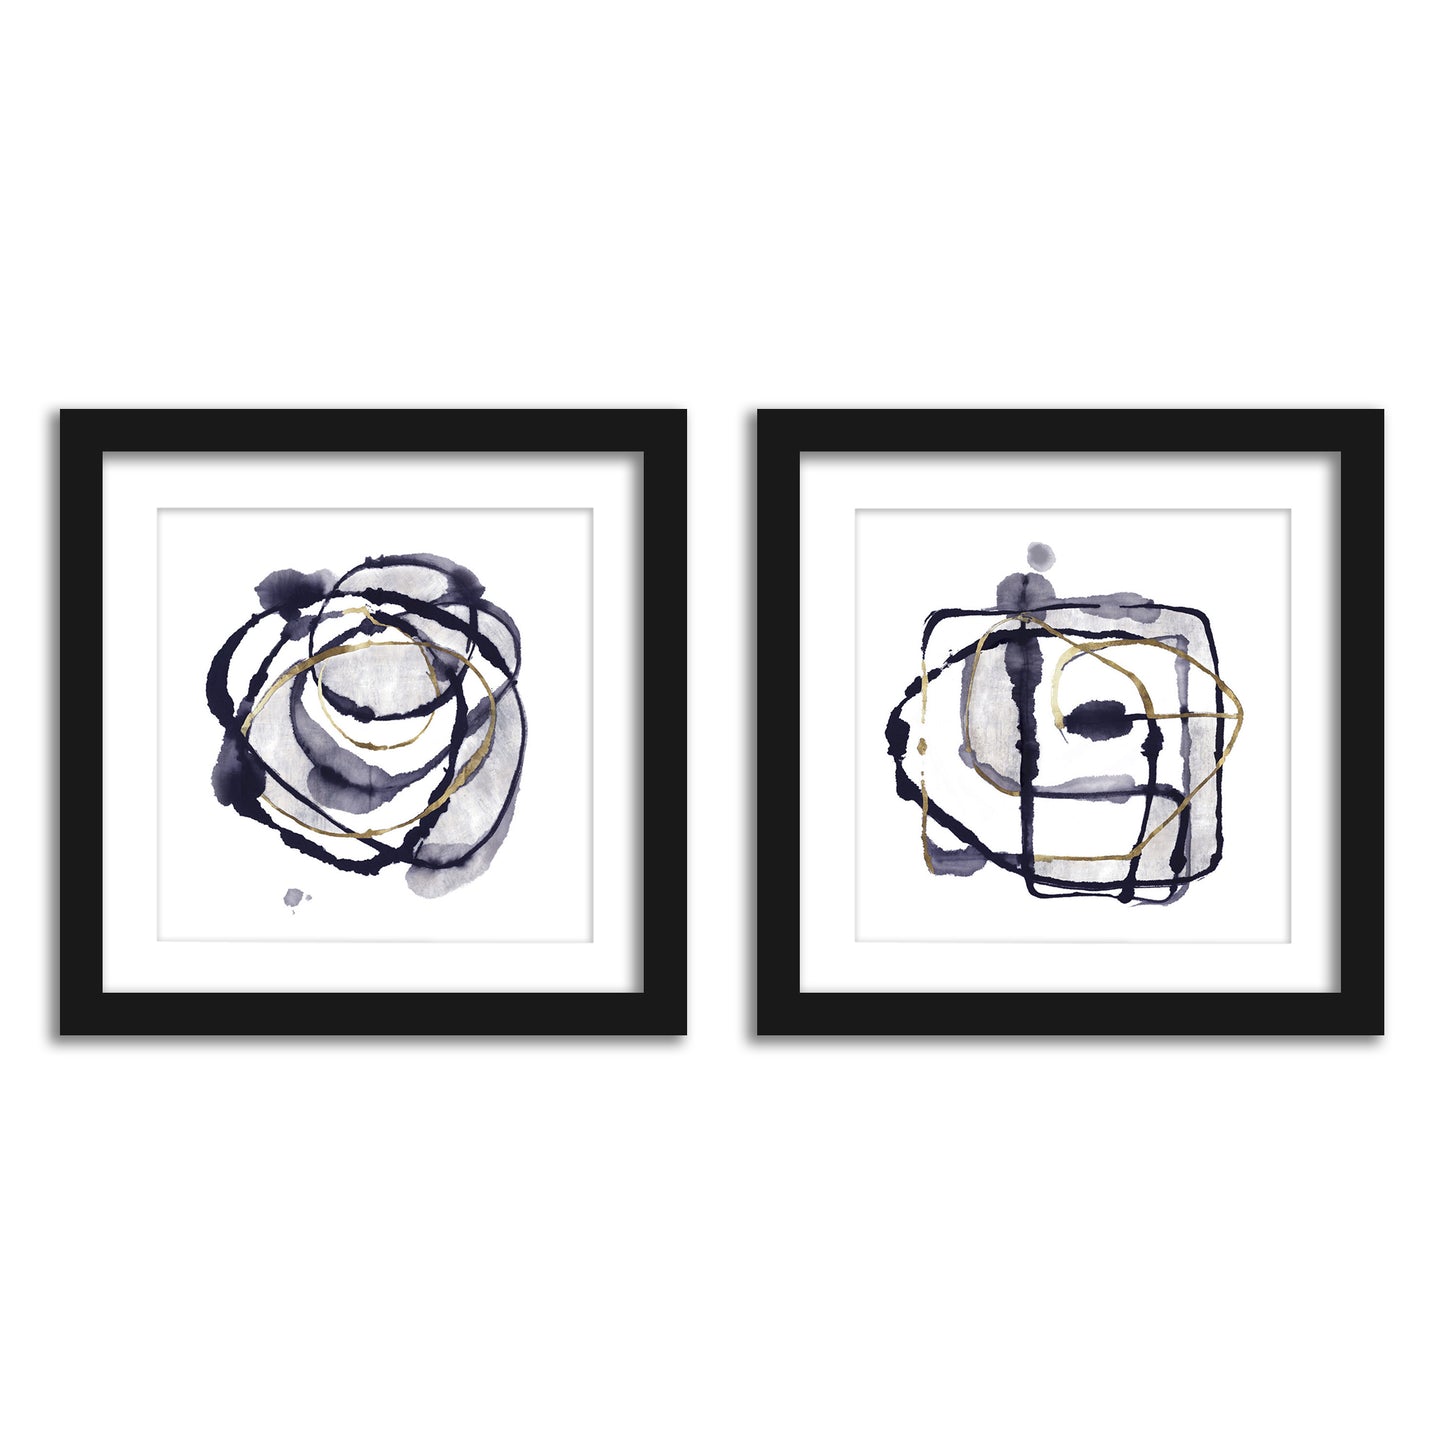  Minimalist Abstract Ink Bathroom Wall Art - Set of 2 Framed Prints by PI Creative